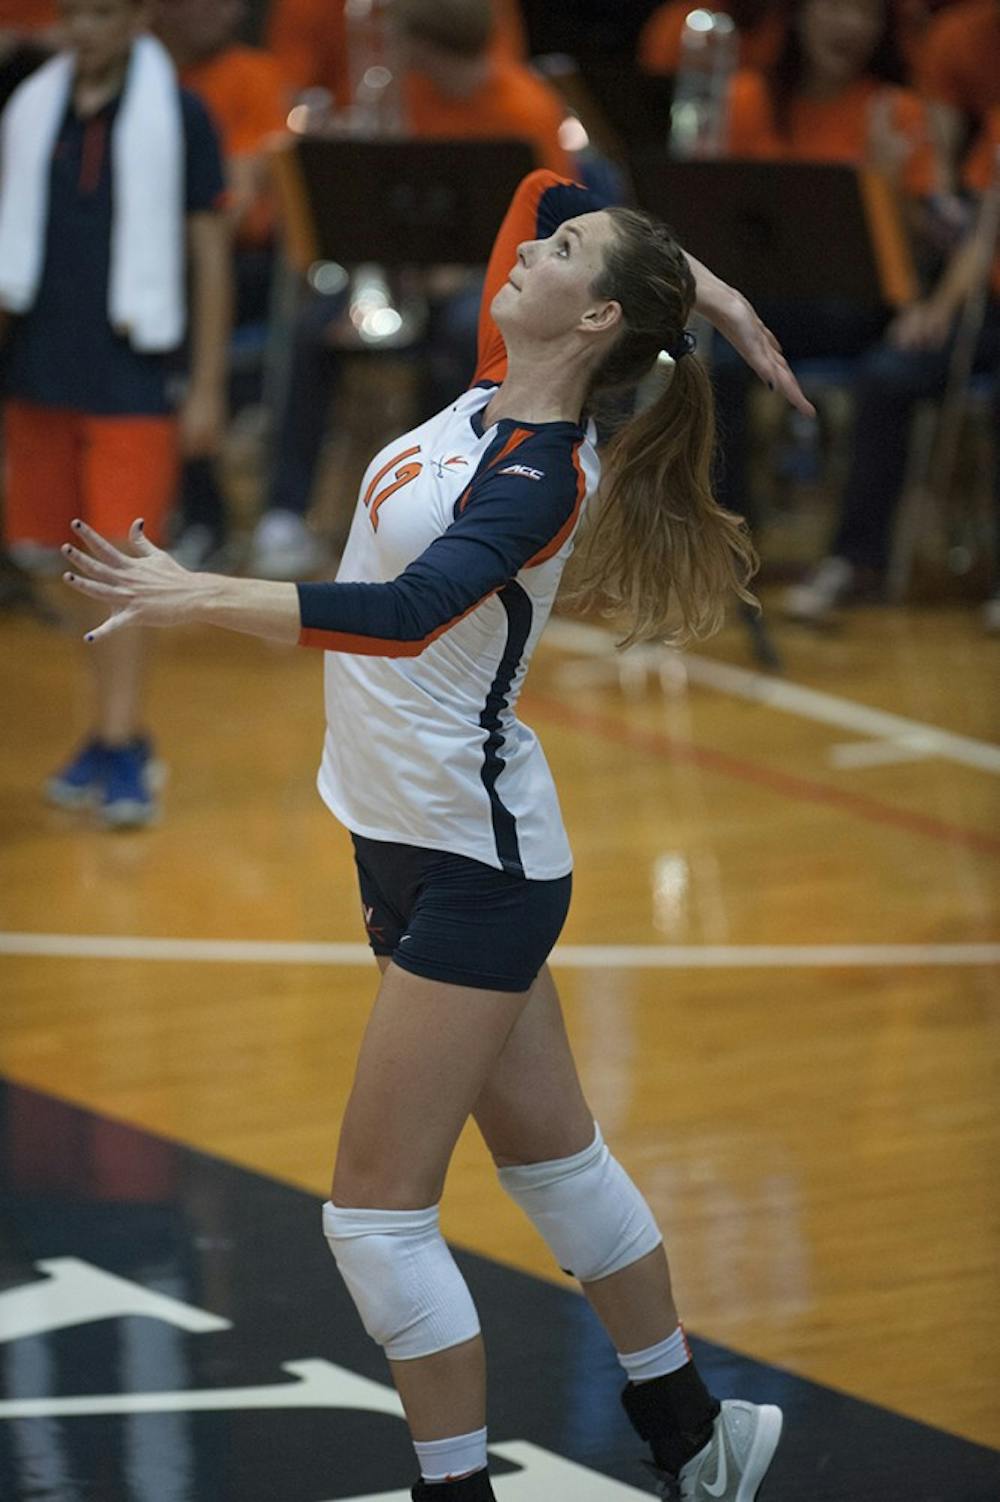 Senior middle hitter Natalie Bausback became only the 17th Cavalier to reach one thousand kills this weekend.